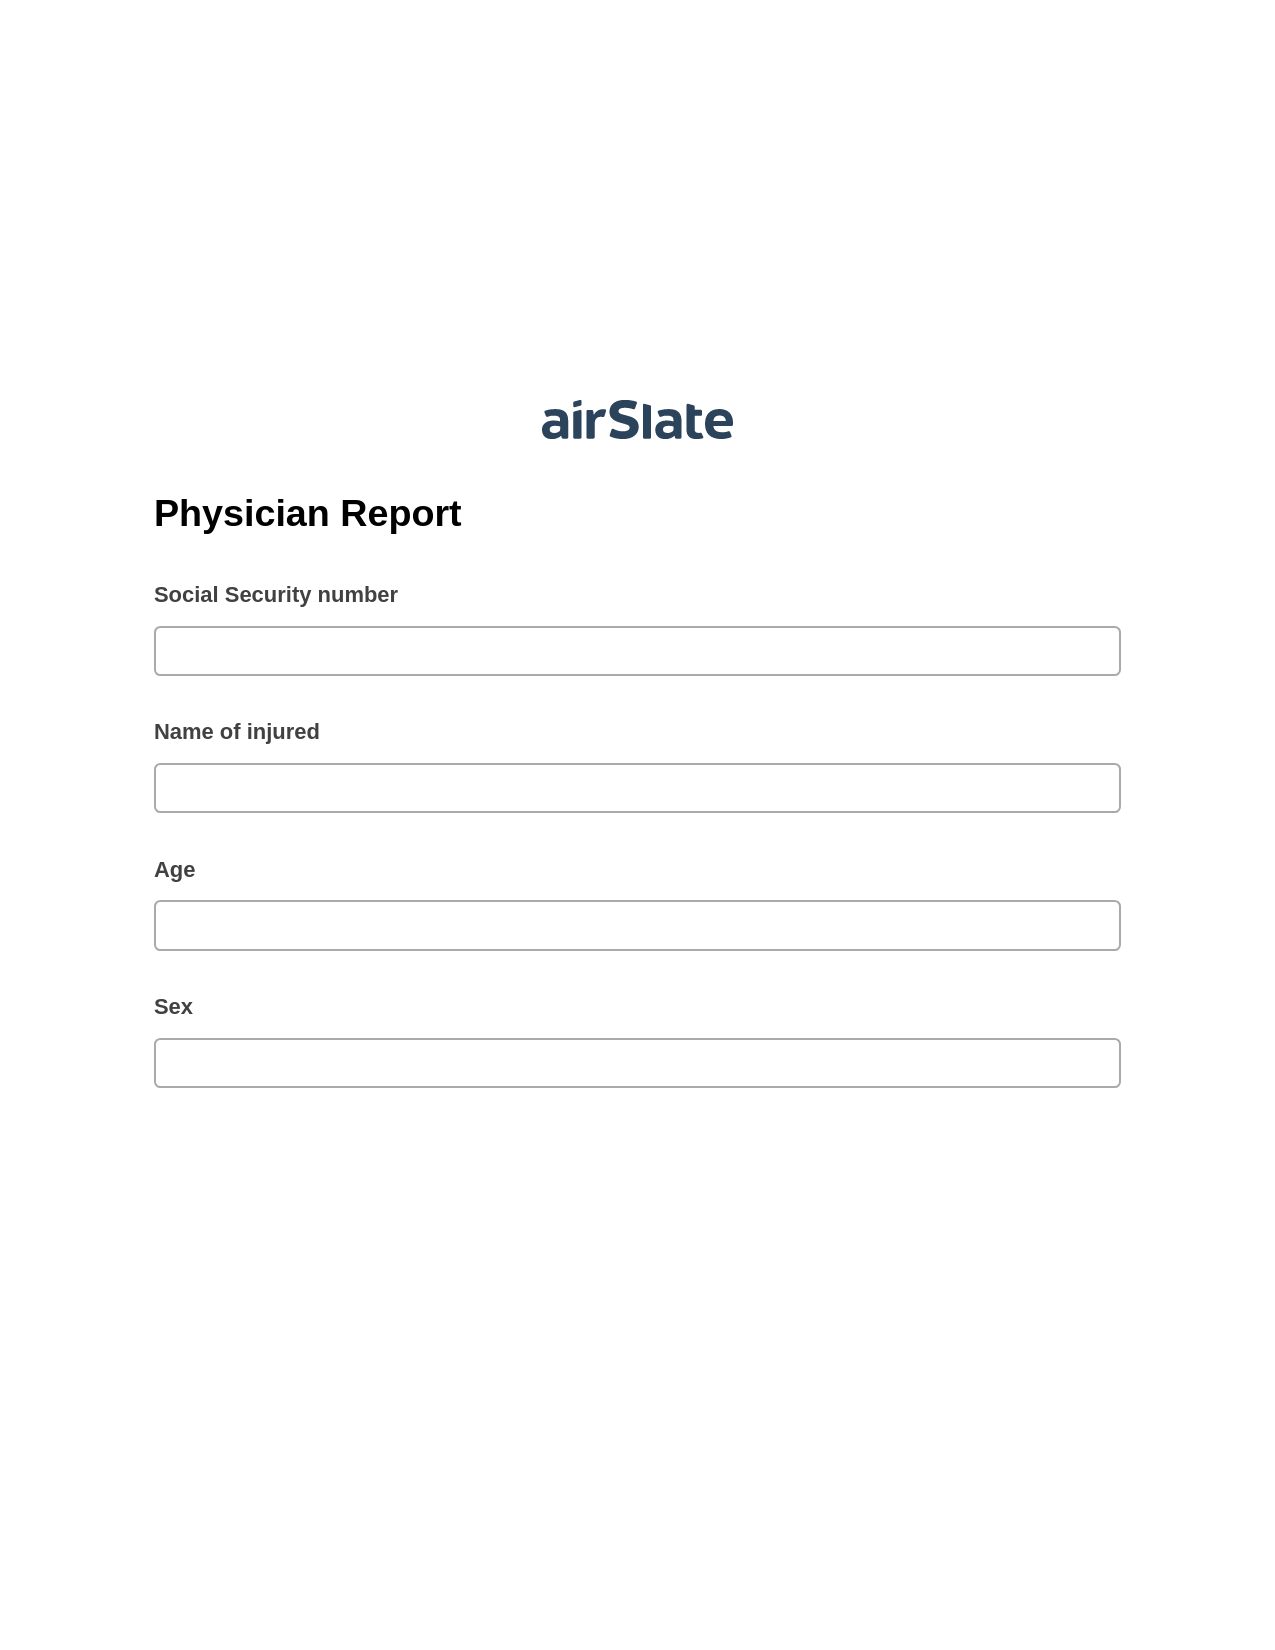 Physician Report System Bot - Slack Two-Way Binding Bot, Lock the Slate Bot, Export to Excel 365 Bot